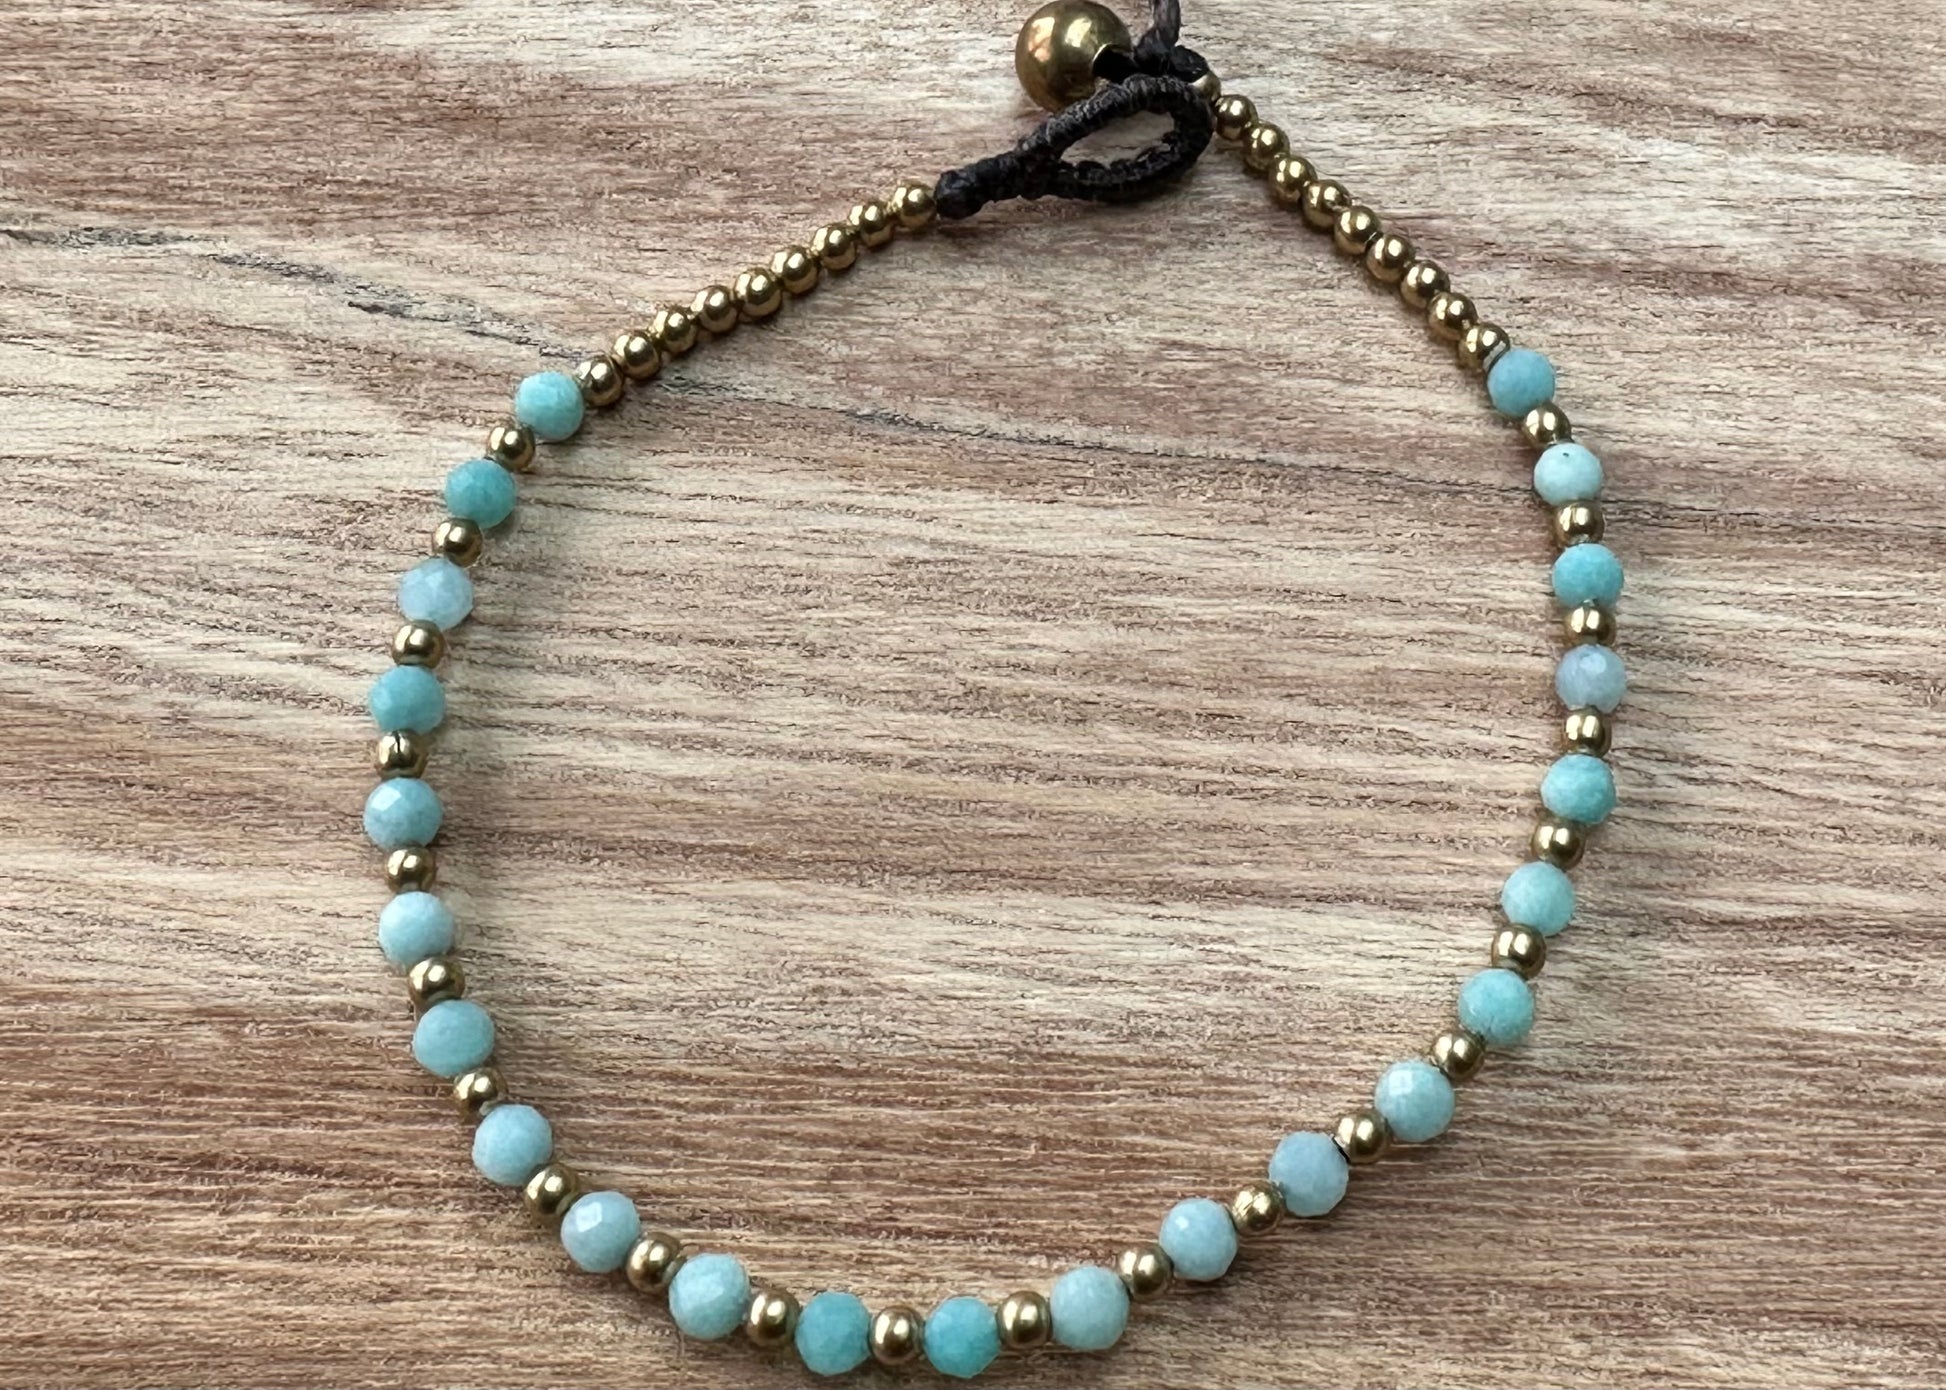 a crystal healing bracelet made of faceted Amazonite crystals on a cotton cord with brass beads